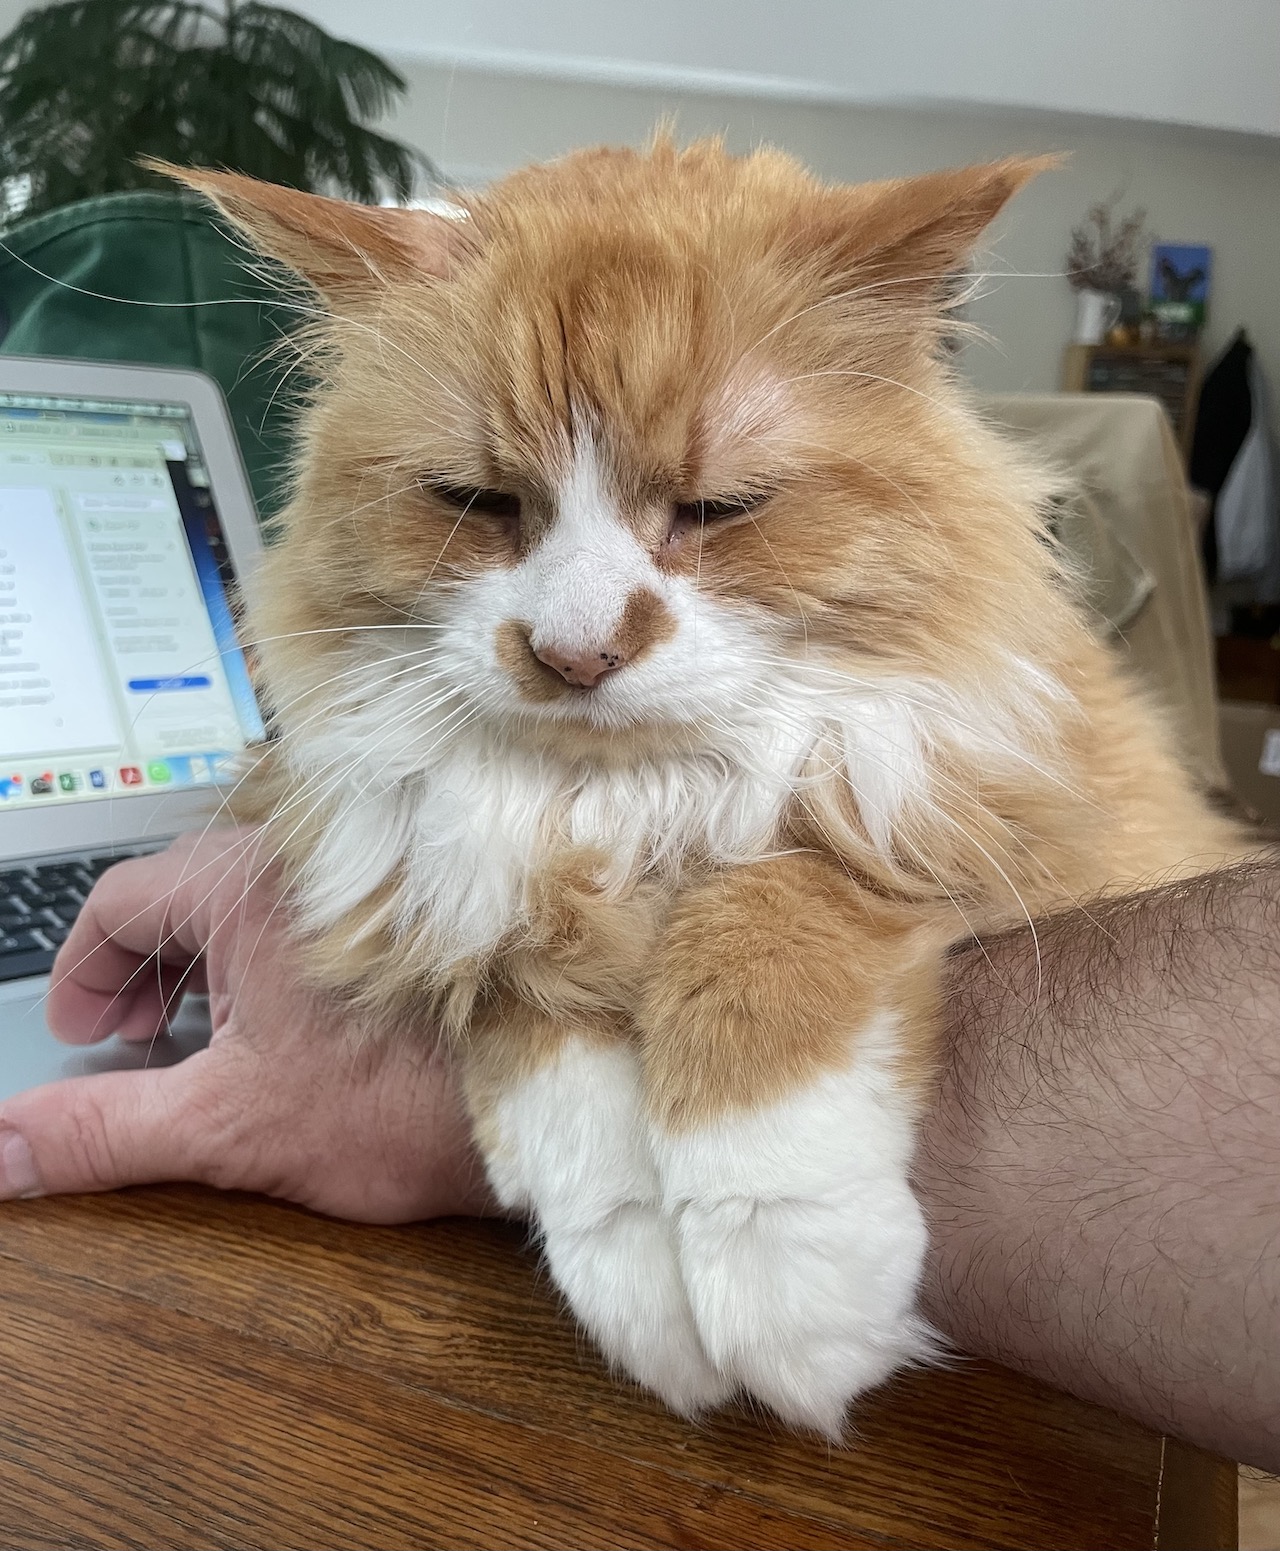 An orange and white longhaired cat rests on a person's arm in front of a laptop